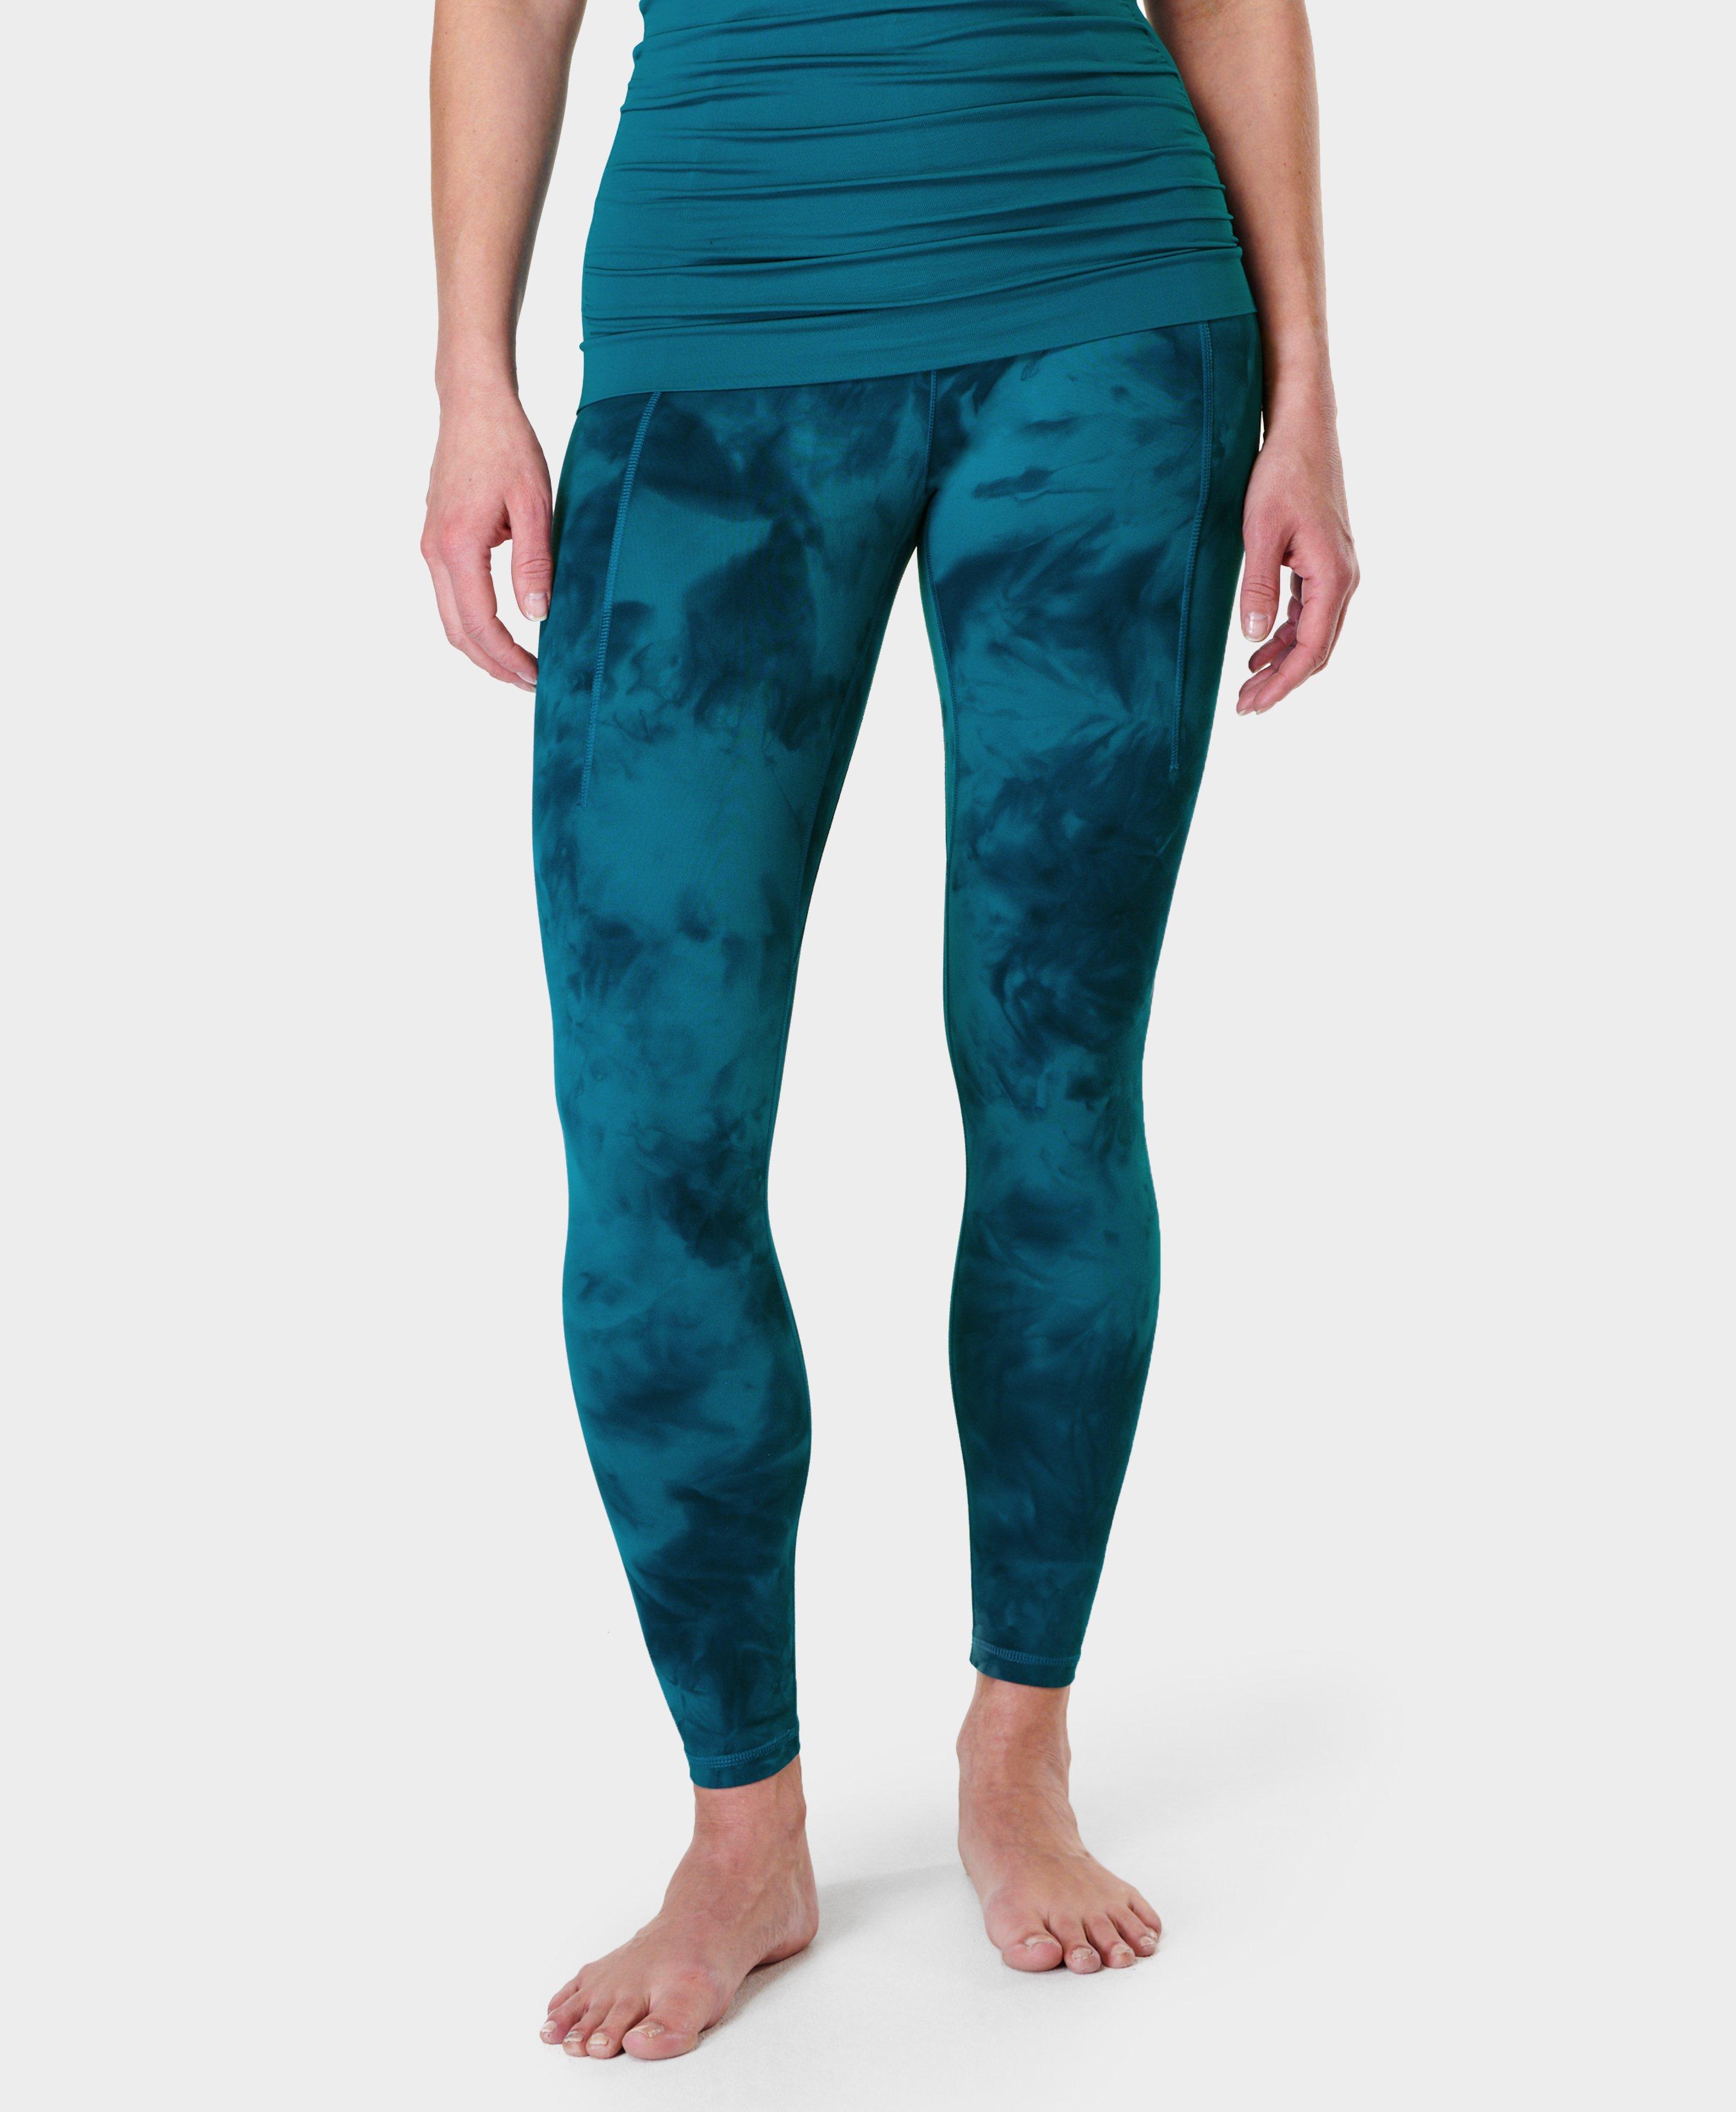 Ombre Teal Leggings Women, Gradient Blue Turquoise Green Tie Dye Yoga Pants  Soft Athletic Workout Gym Sports Ladies Tights 